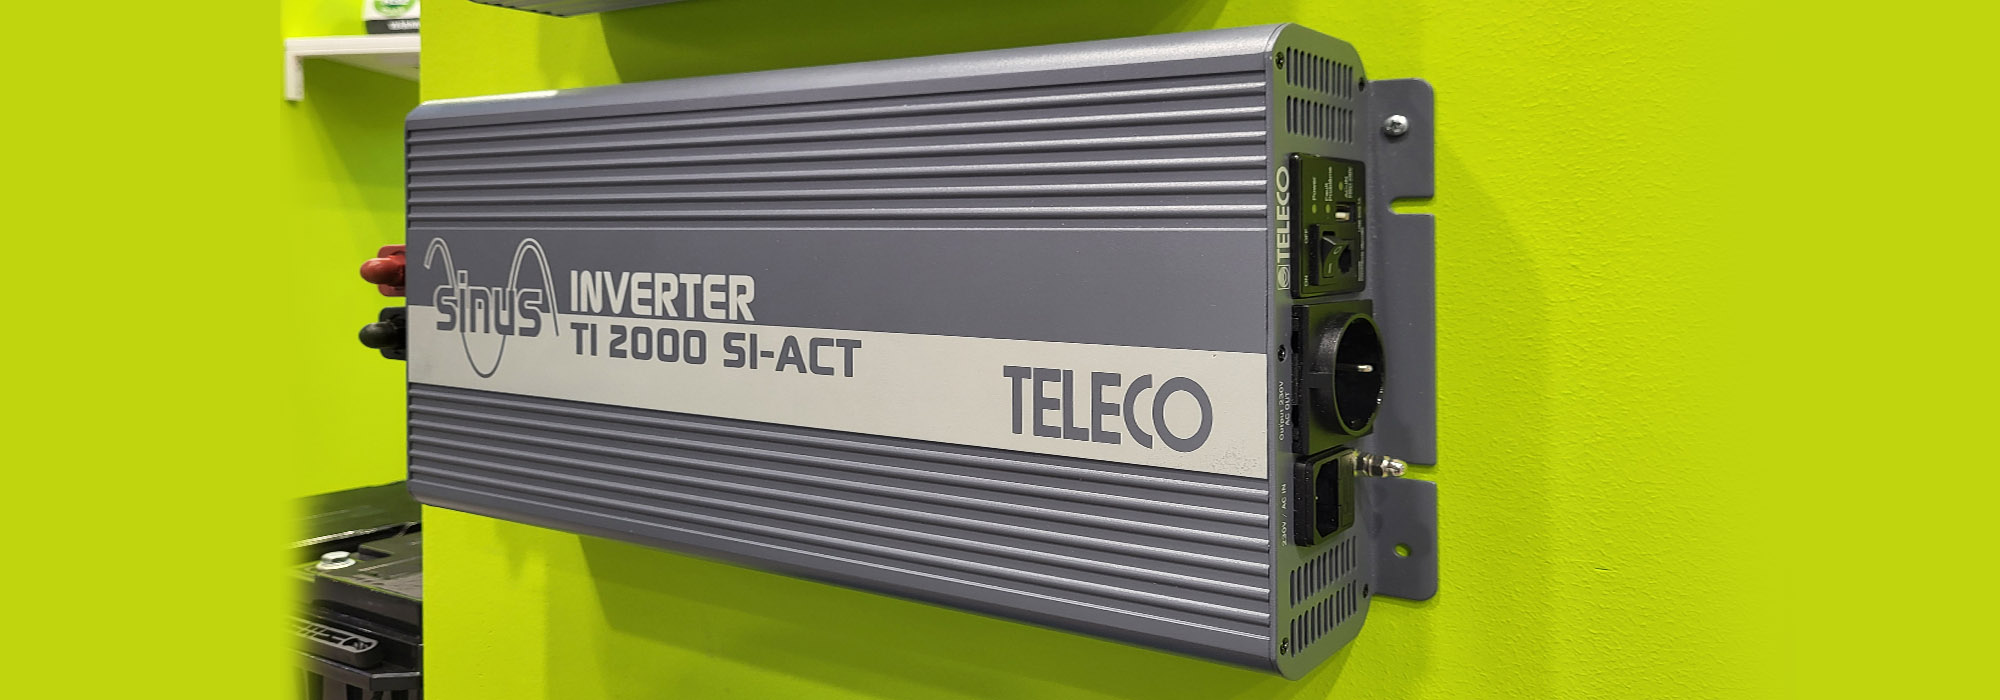 Pure sine wave and 2,000 watts of power for Teleco’s new Sinus TI 2000 SI-ACT inverter